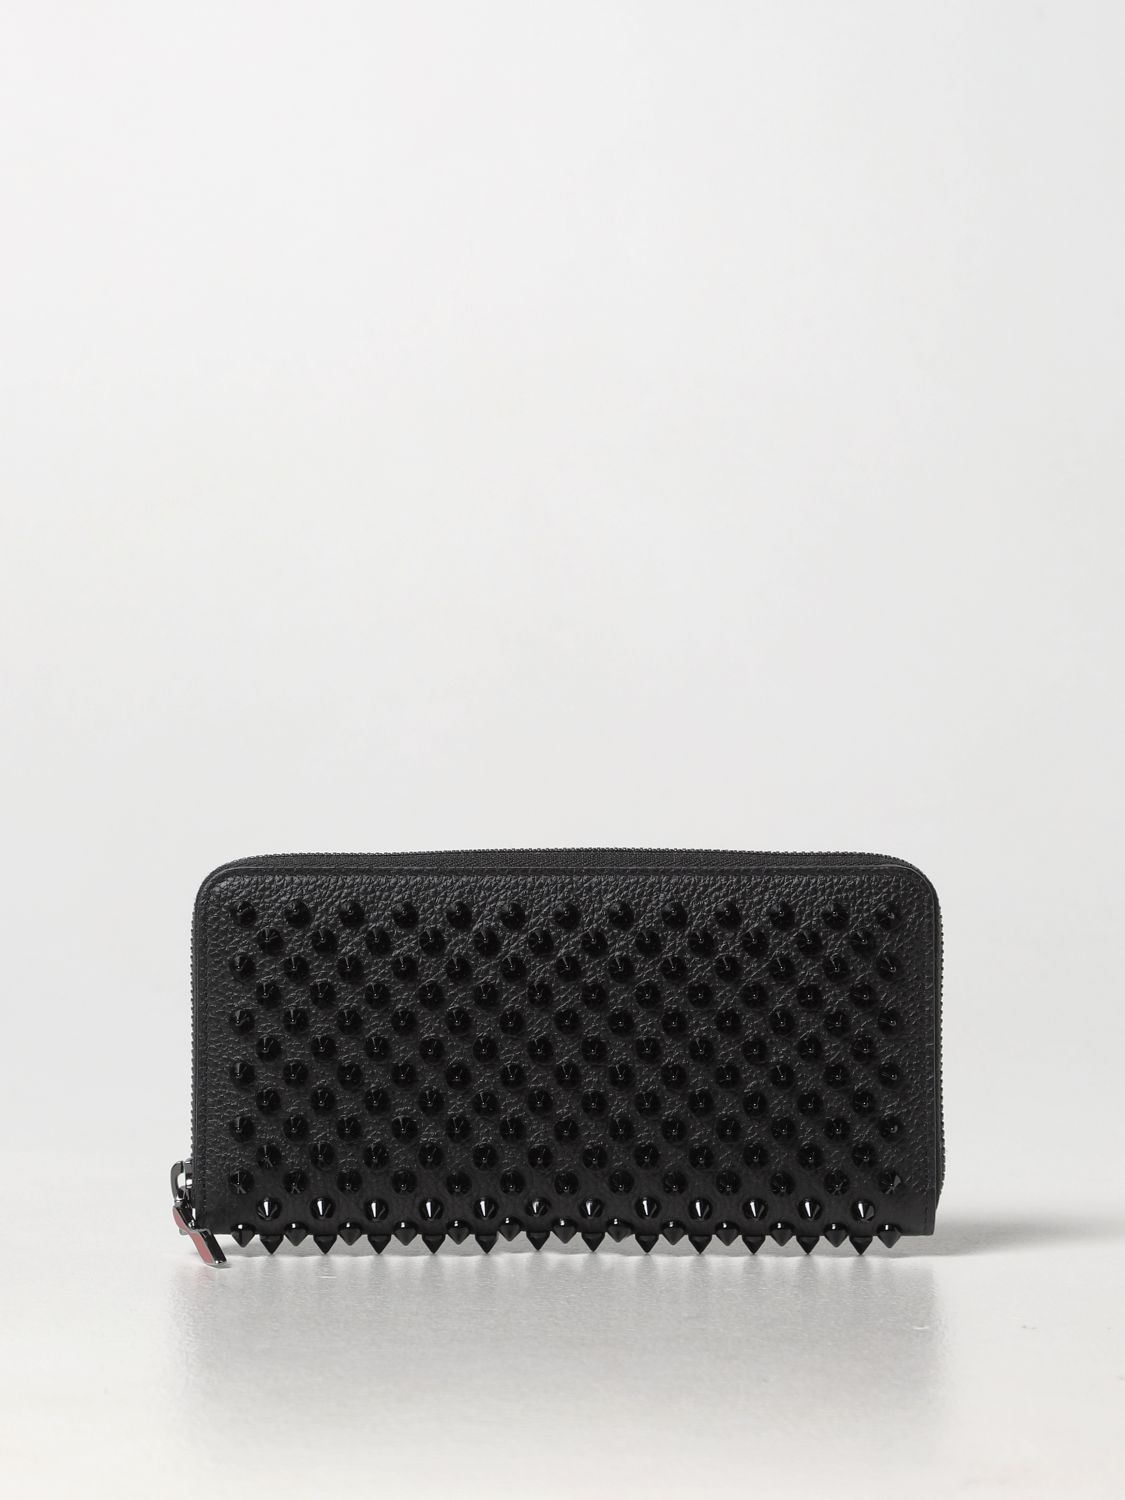  Christian Louboutin Panettone Black Spiked Leather Wallet :  Clothing, Shoes & Jewelry